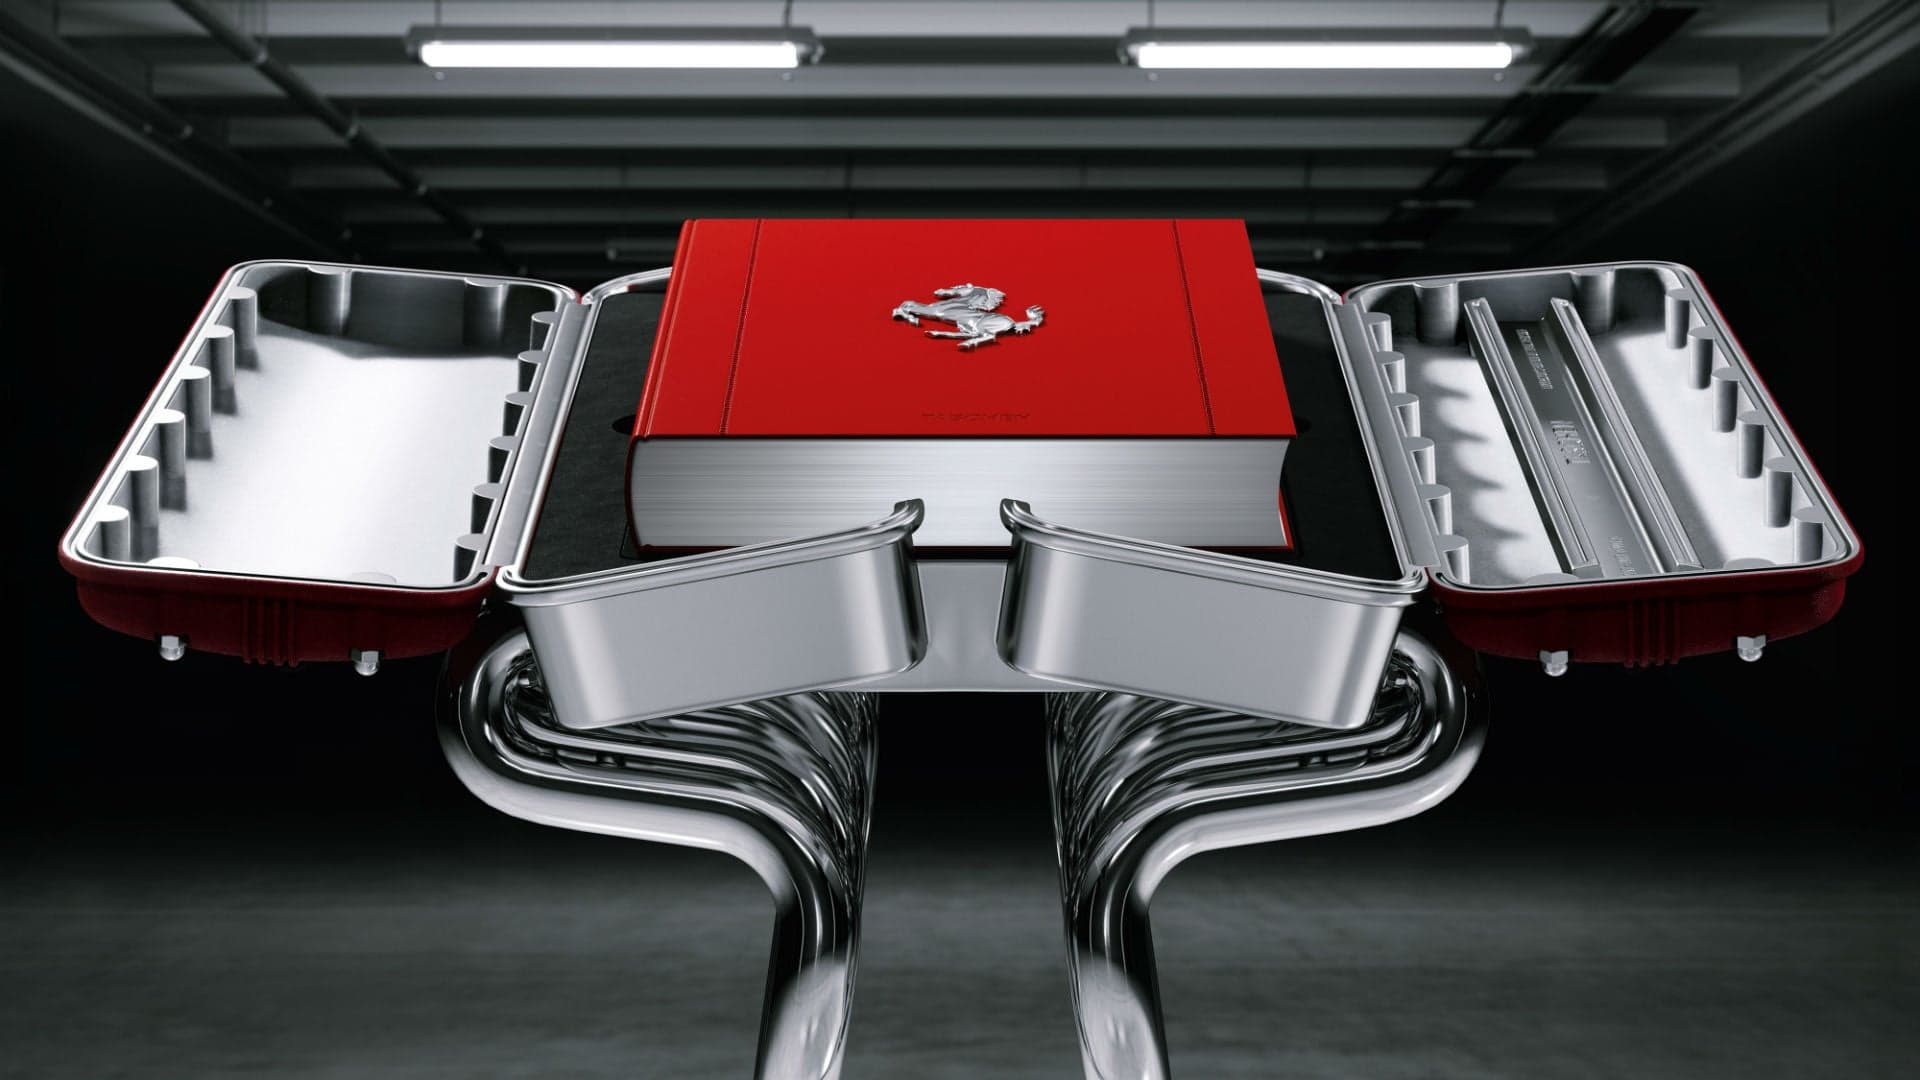 This $30,000 Coffee Table Book Is Only for the Most Hardcore Ferrari Enthusiast